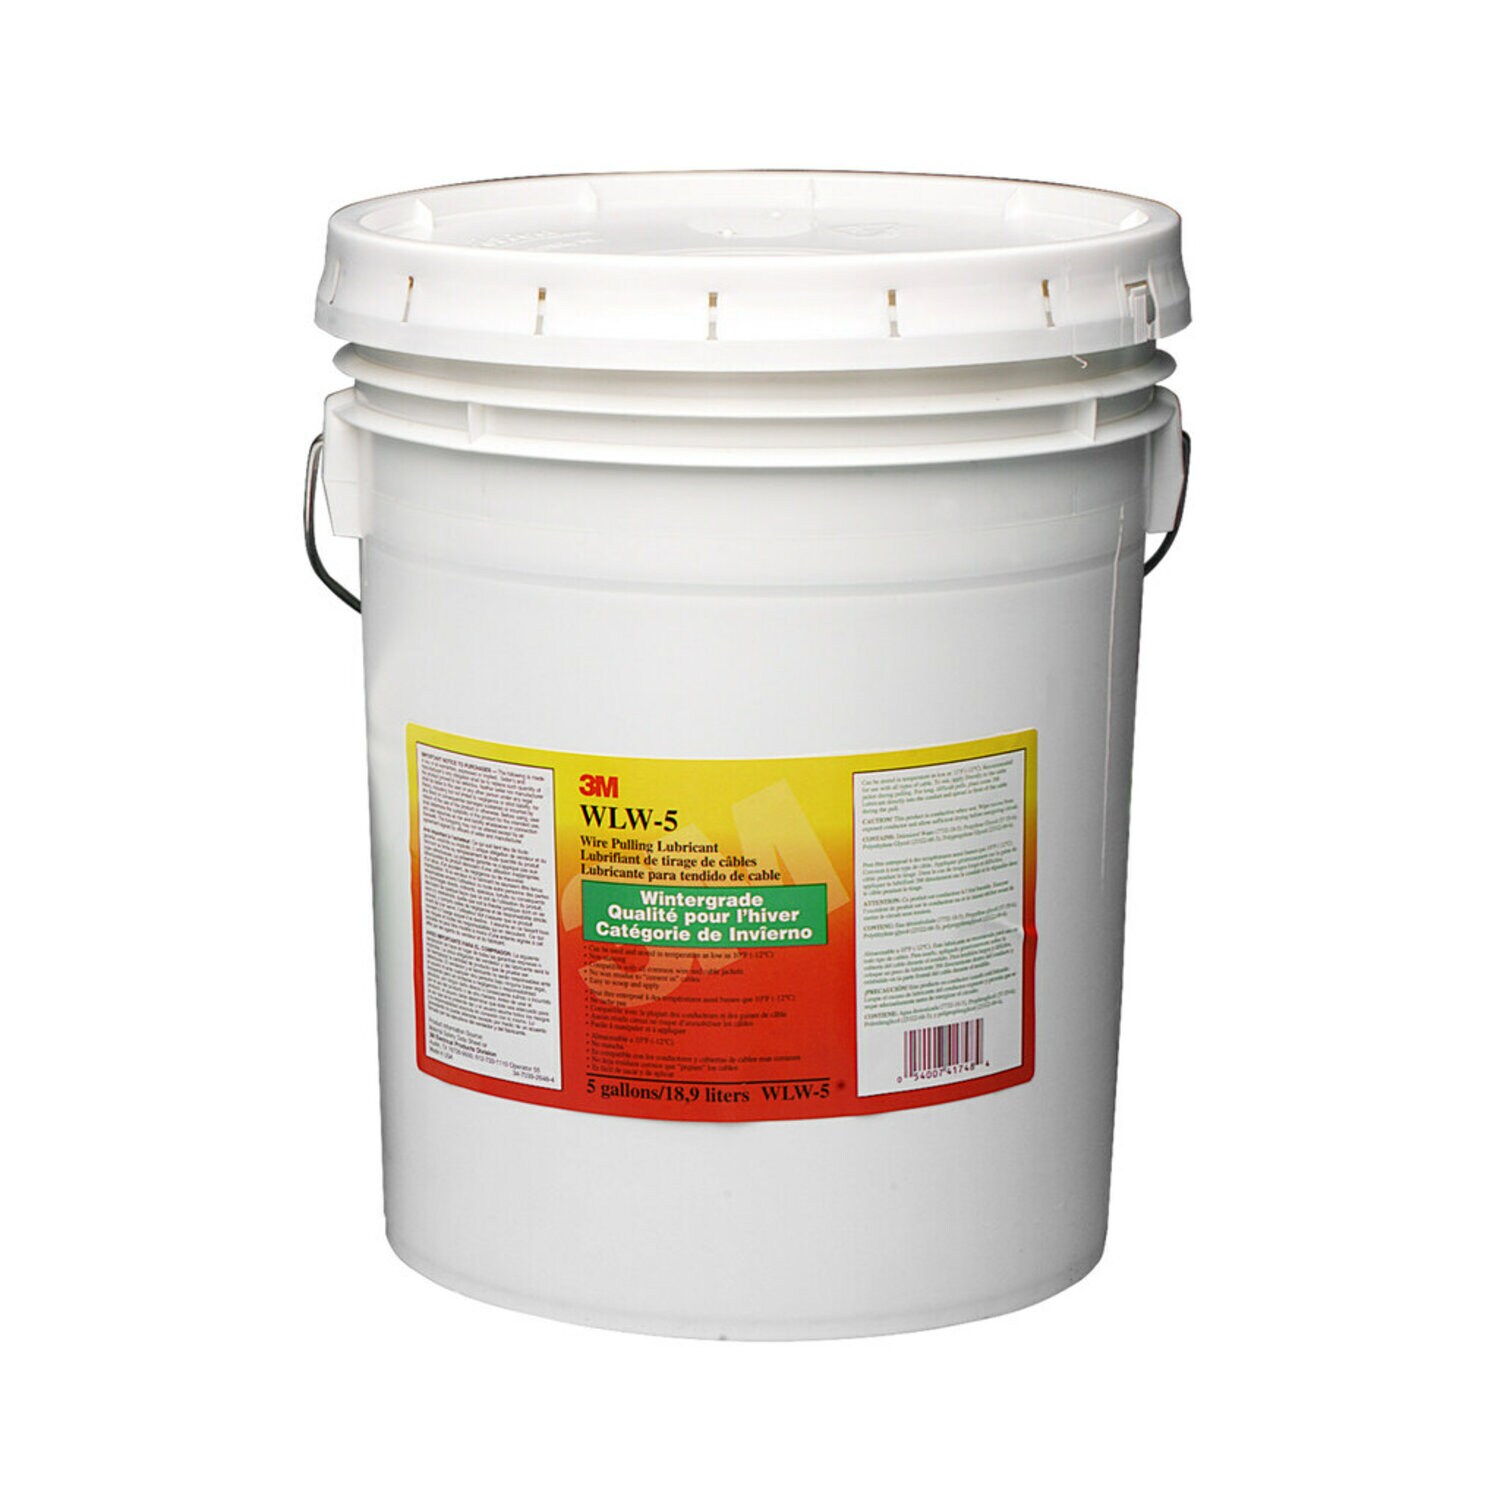 7000132634 - 3M Wire Pulling Lubricant Wintergrade WLW-5, 5 Gallons, excellent
lubricant for pulling a wide variety of cables types, 1/DR